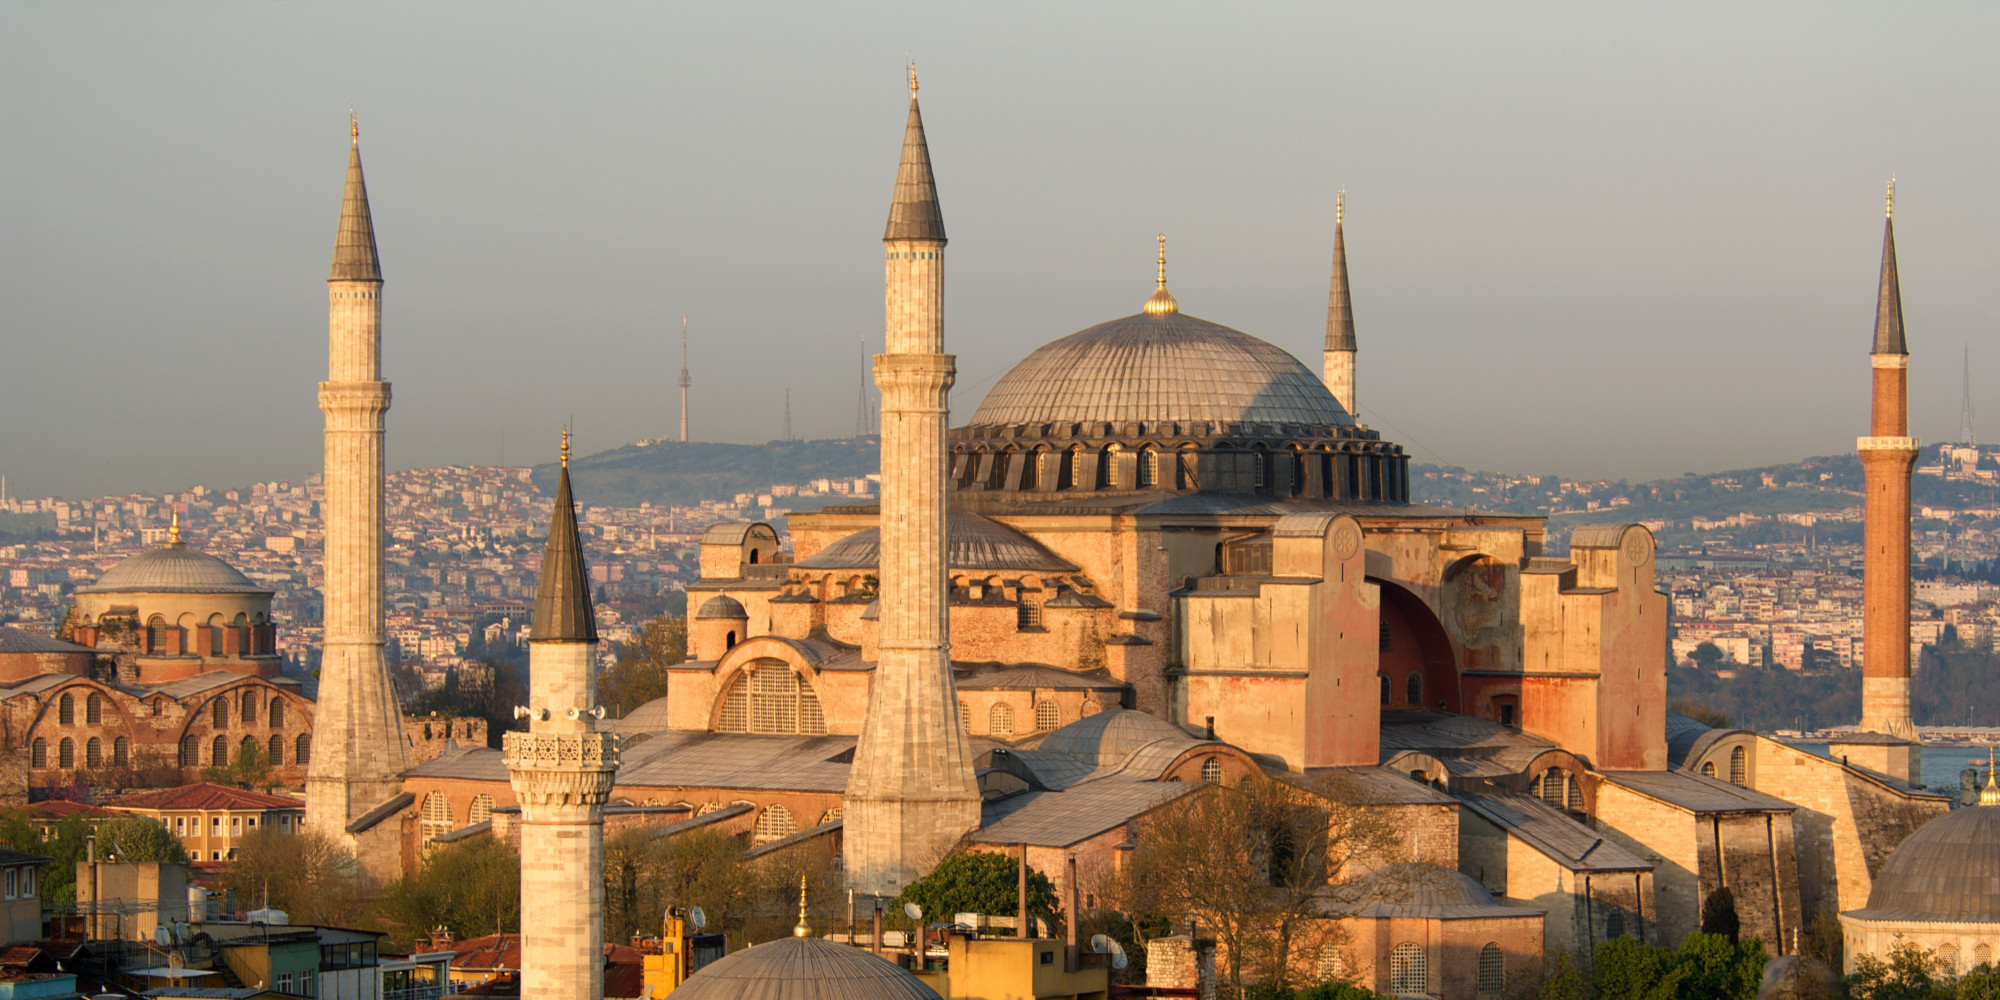 Nice Images Collection: Hagia Sophia Desktop Wallpapers